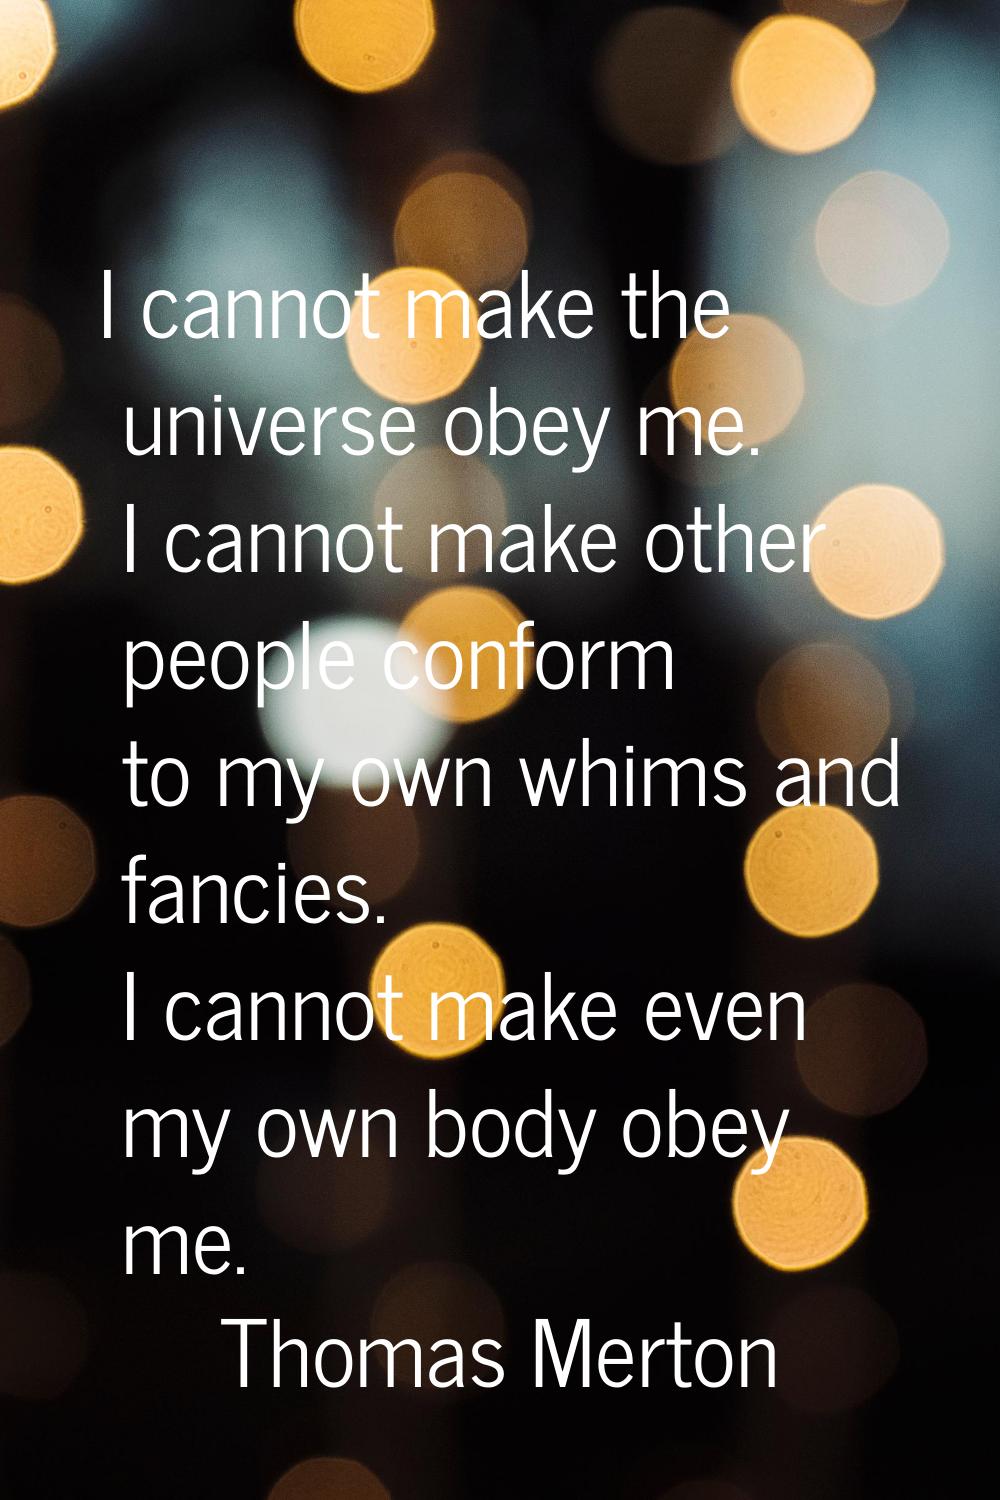 I cannot make the universe obey me. I cannot make other people conform to my own whims and fancies.